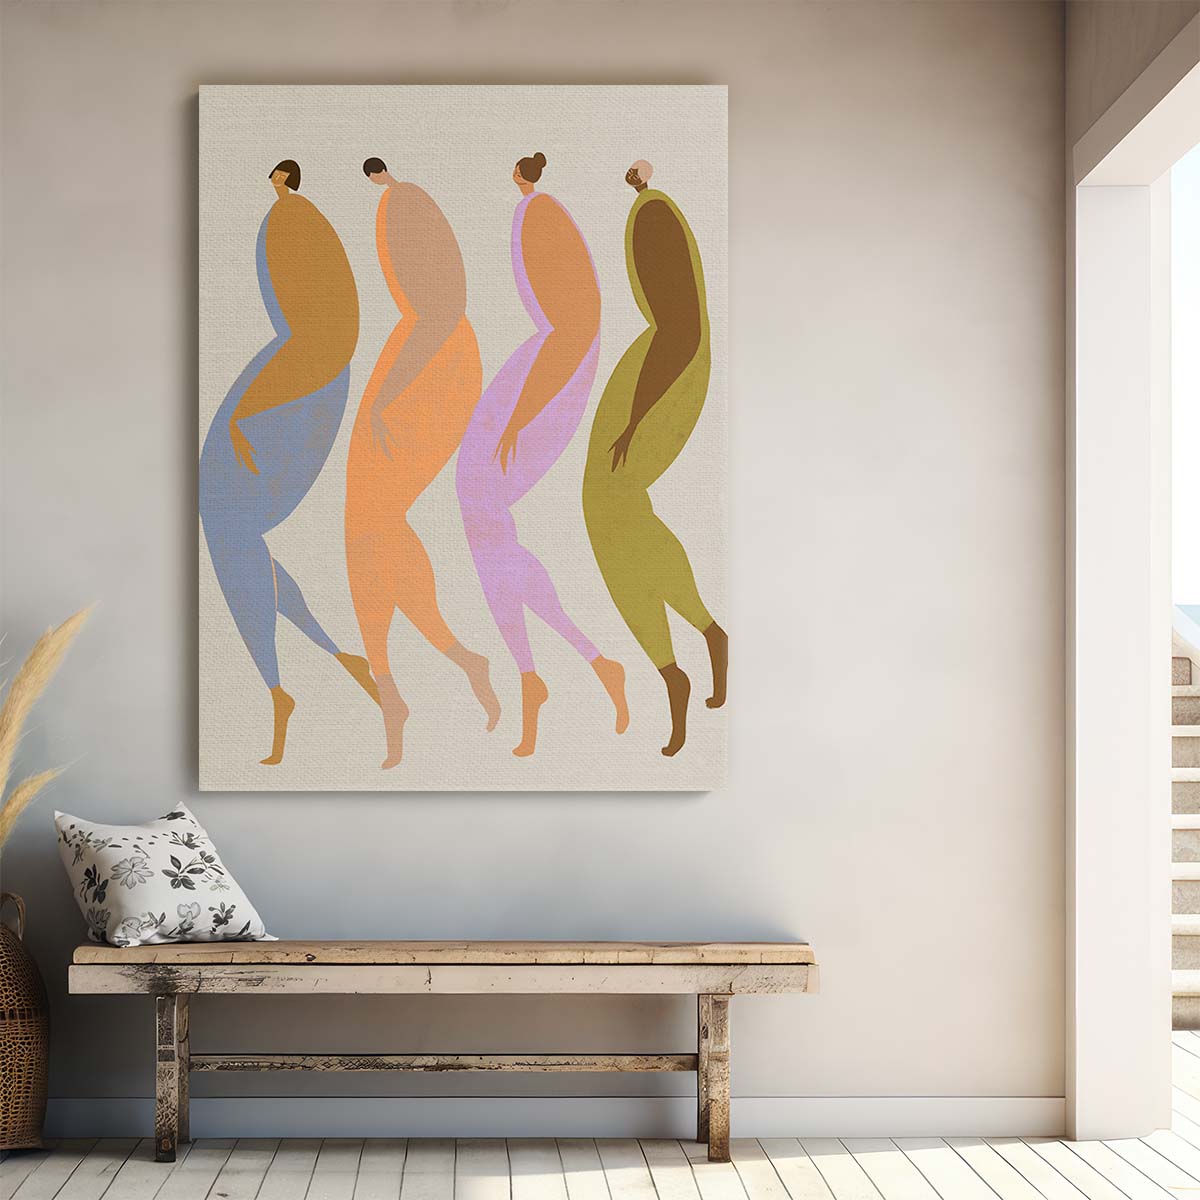 Colorful Boho Illustration of Four Diverse Women Walking, Figurative Wall Art by Luxuriance Designs, made in USA